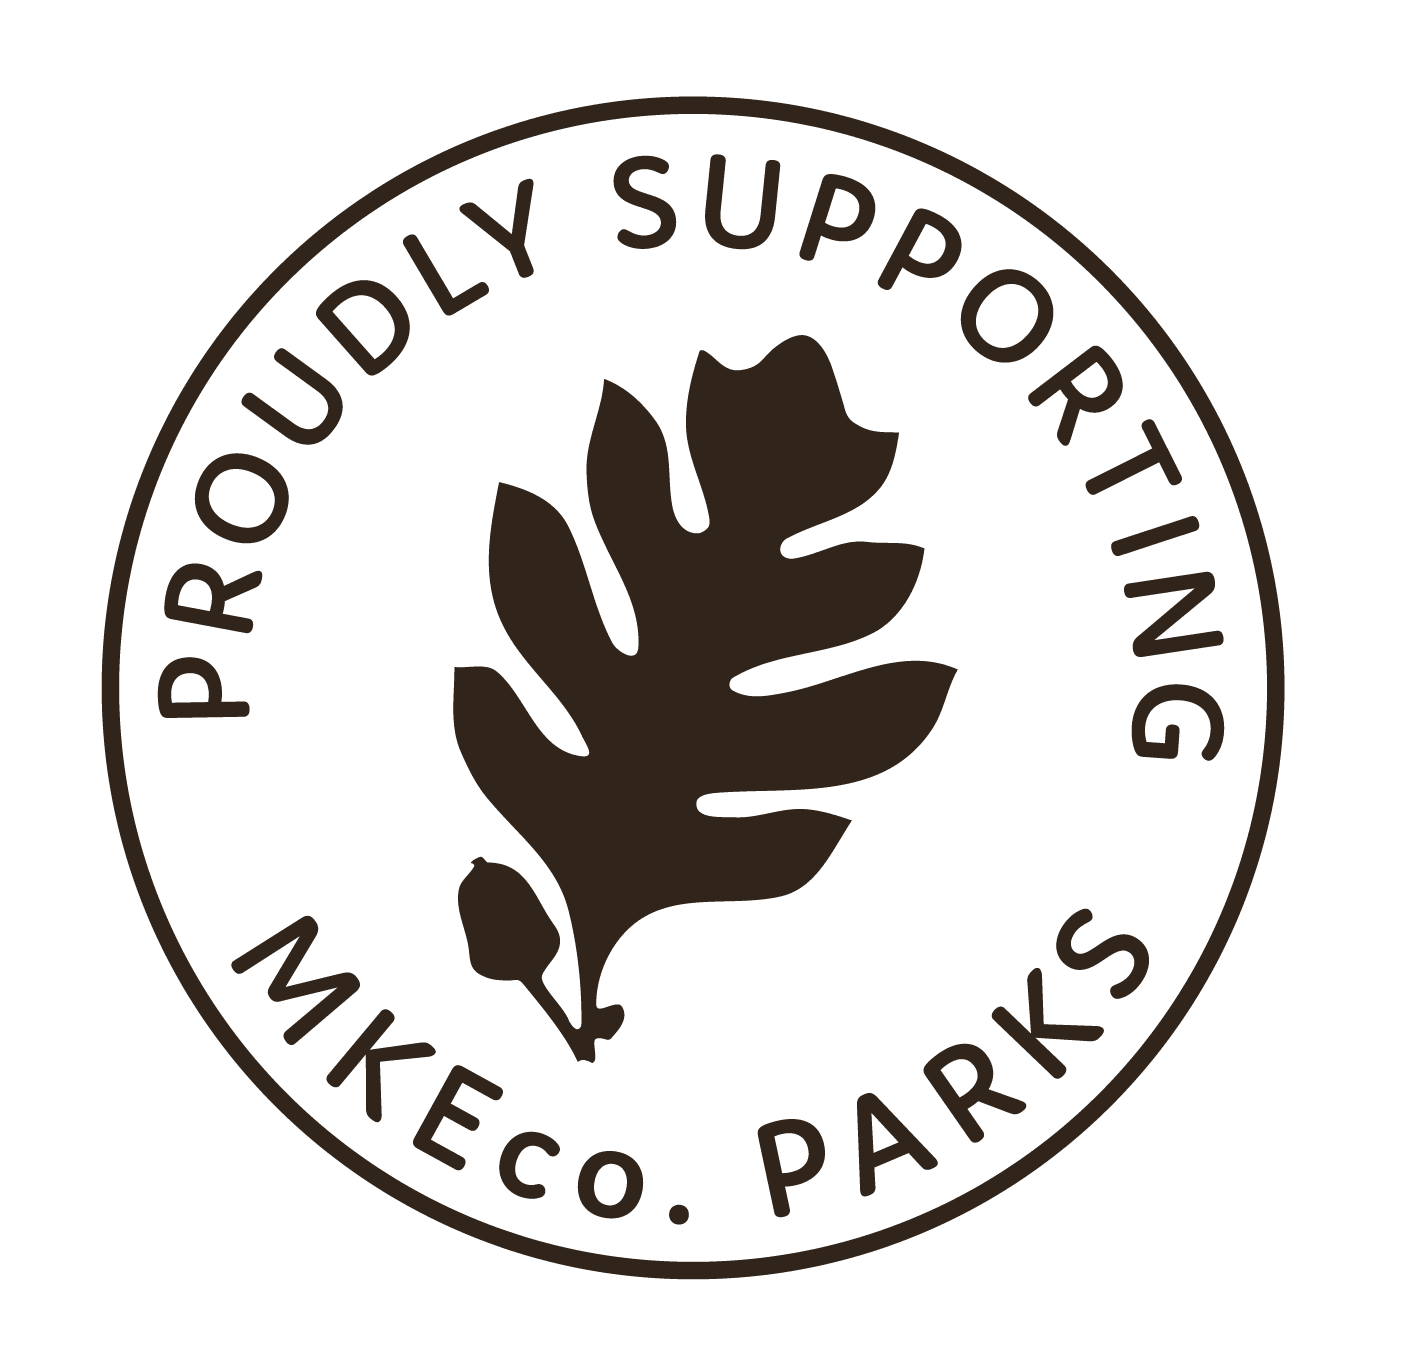 "Proudly Supporting" MKEco. Parks